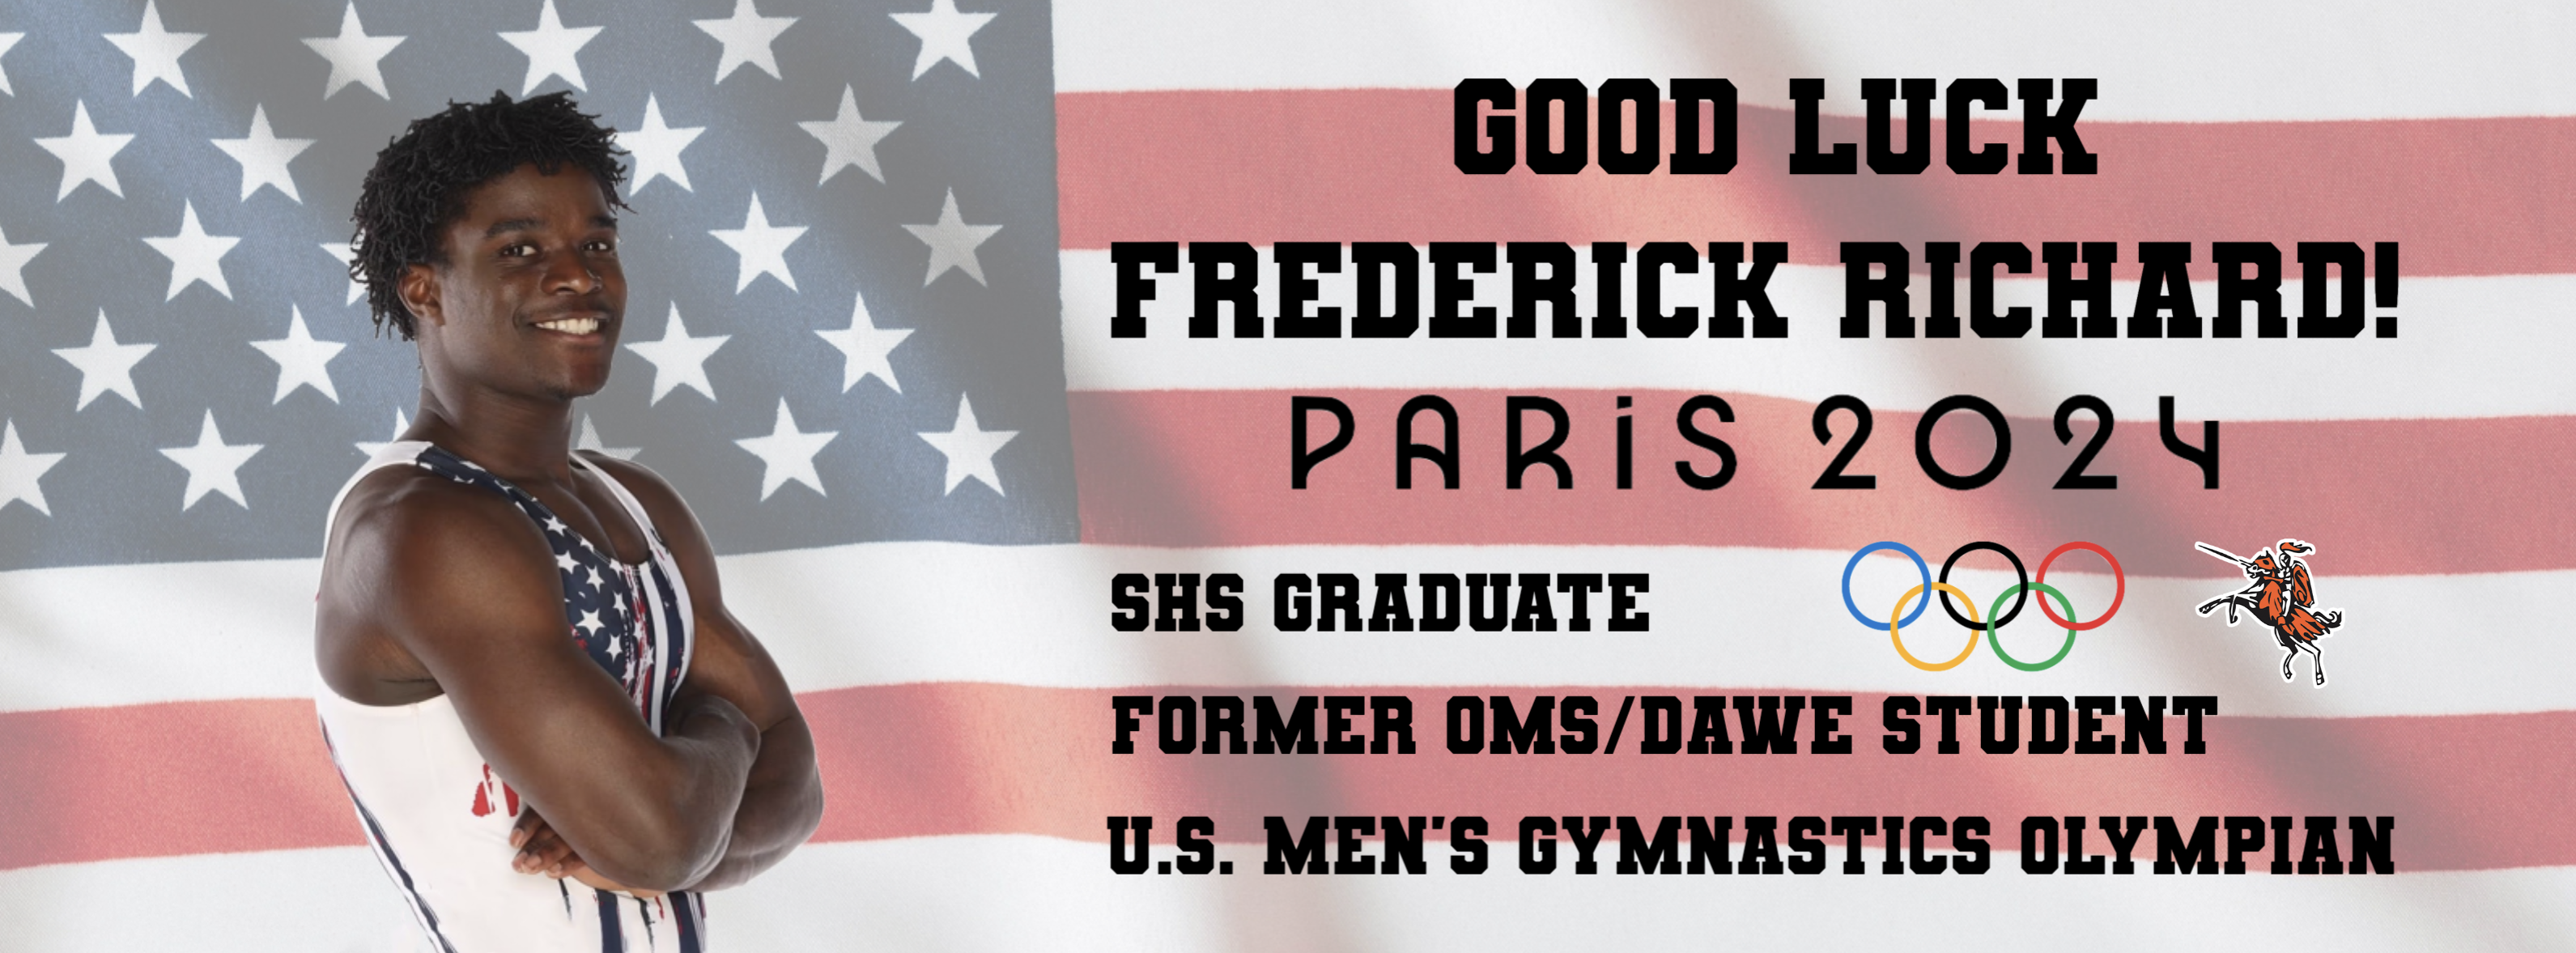 Good luck to SHS graduate Frederick Richard at the Olympics!